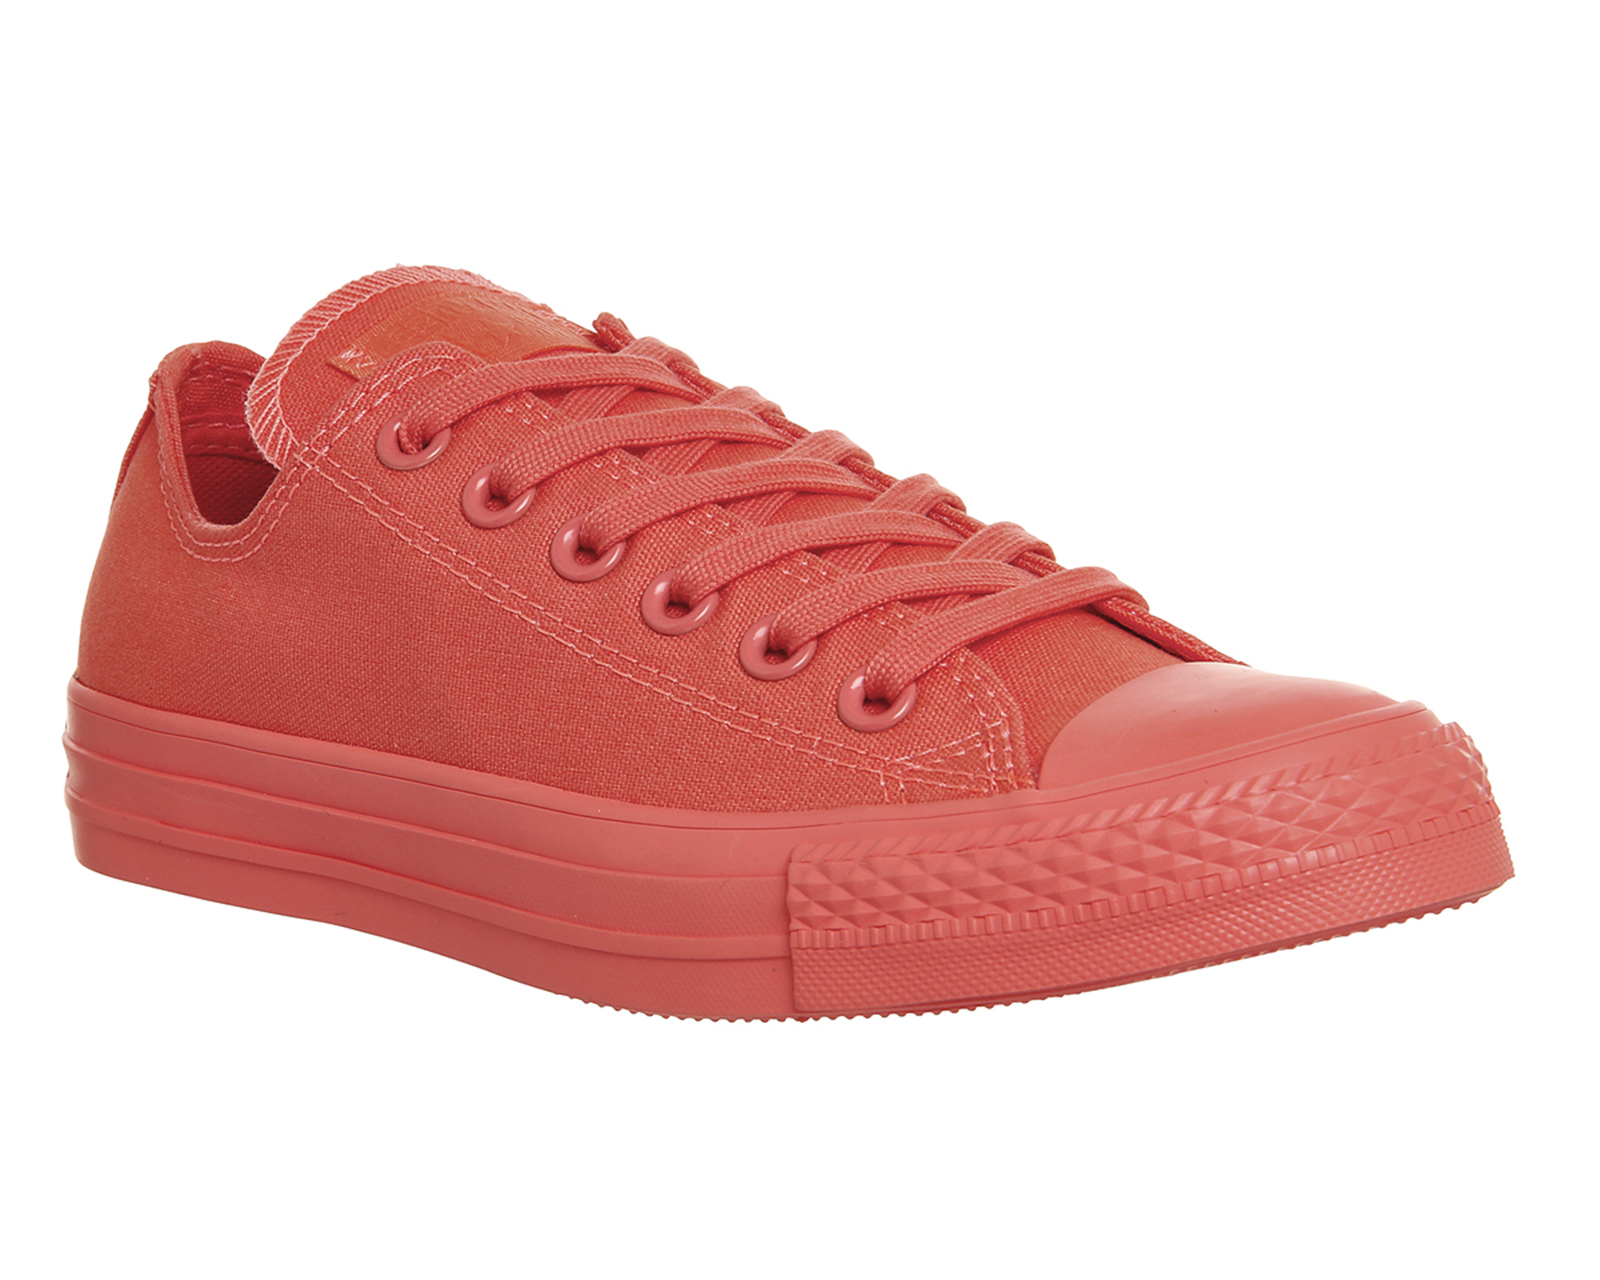 Converse All Star Low Fusion Coral - Unisex Sports